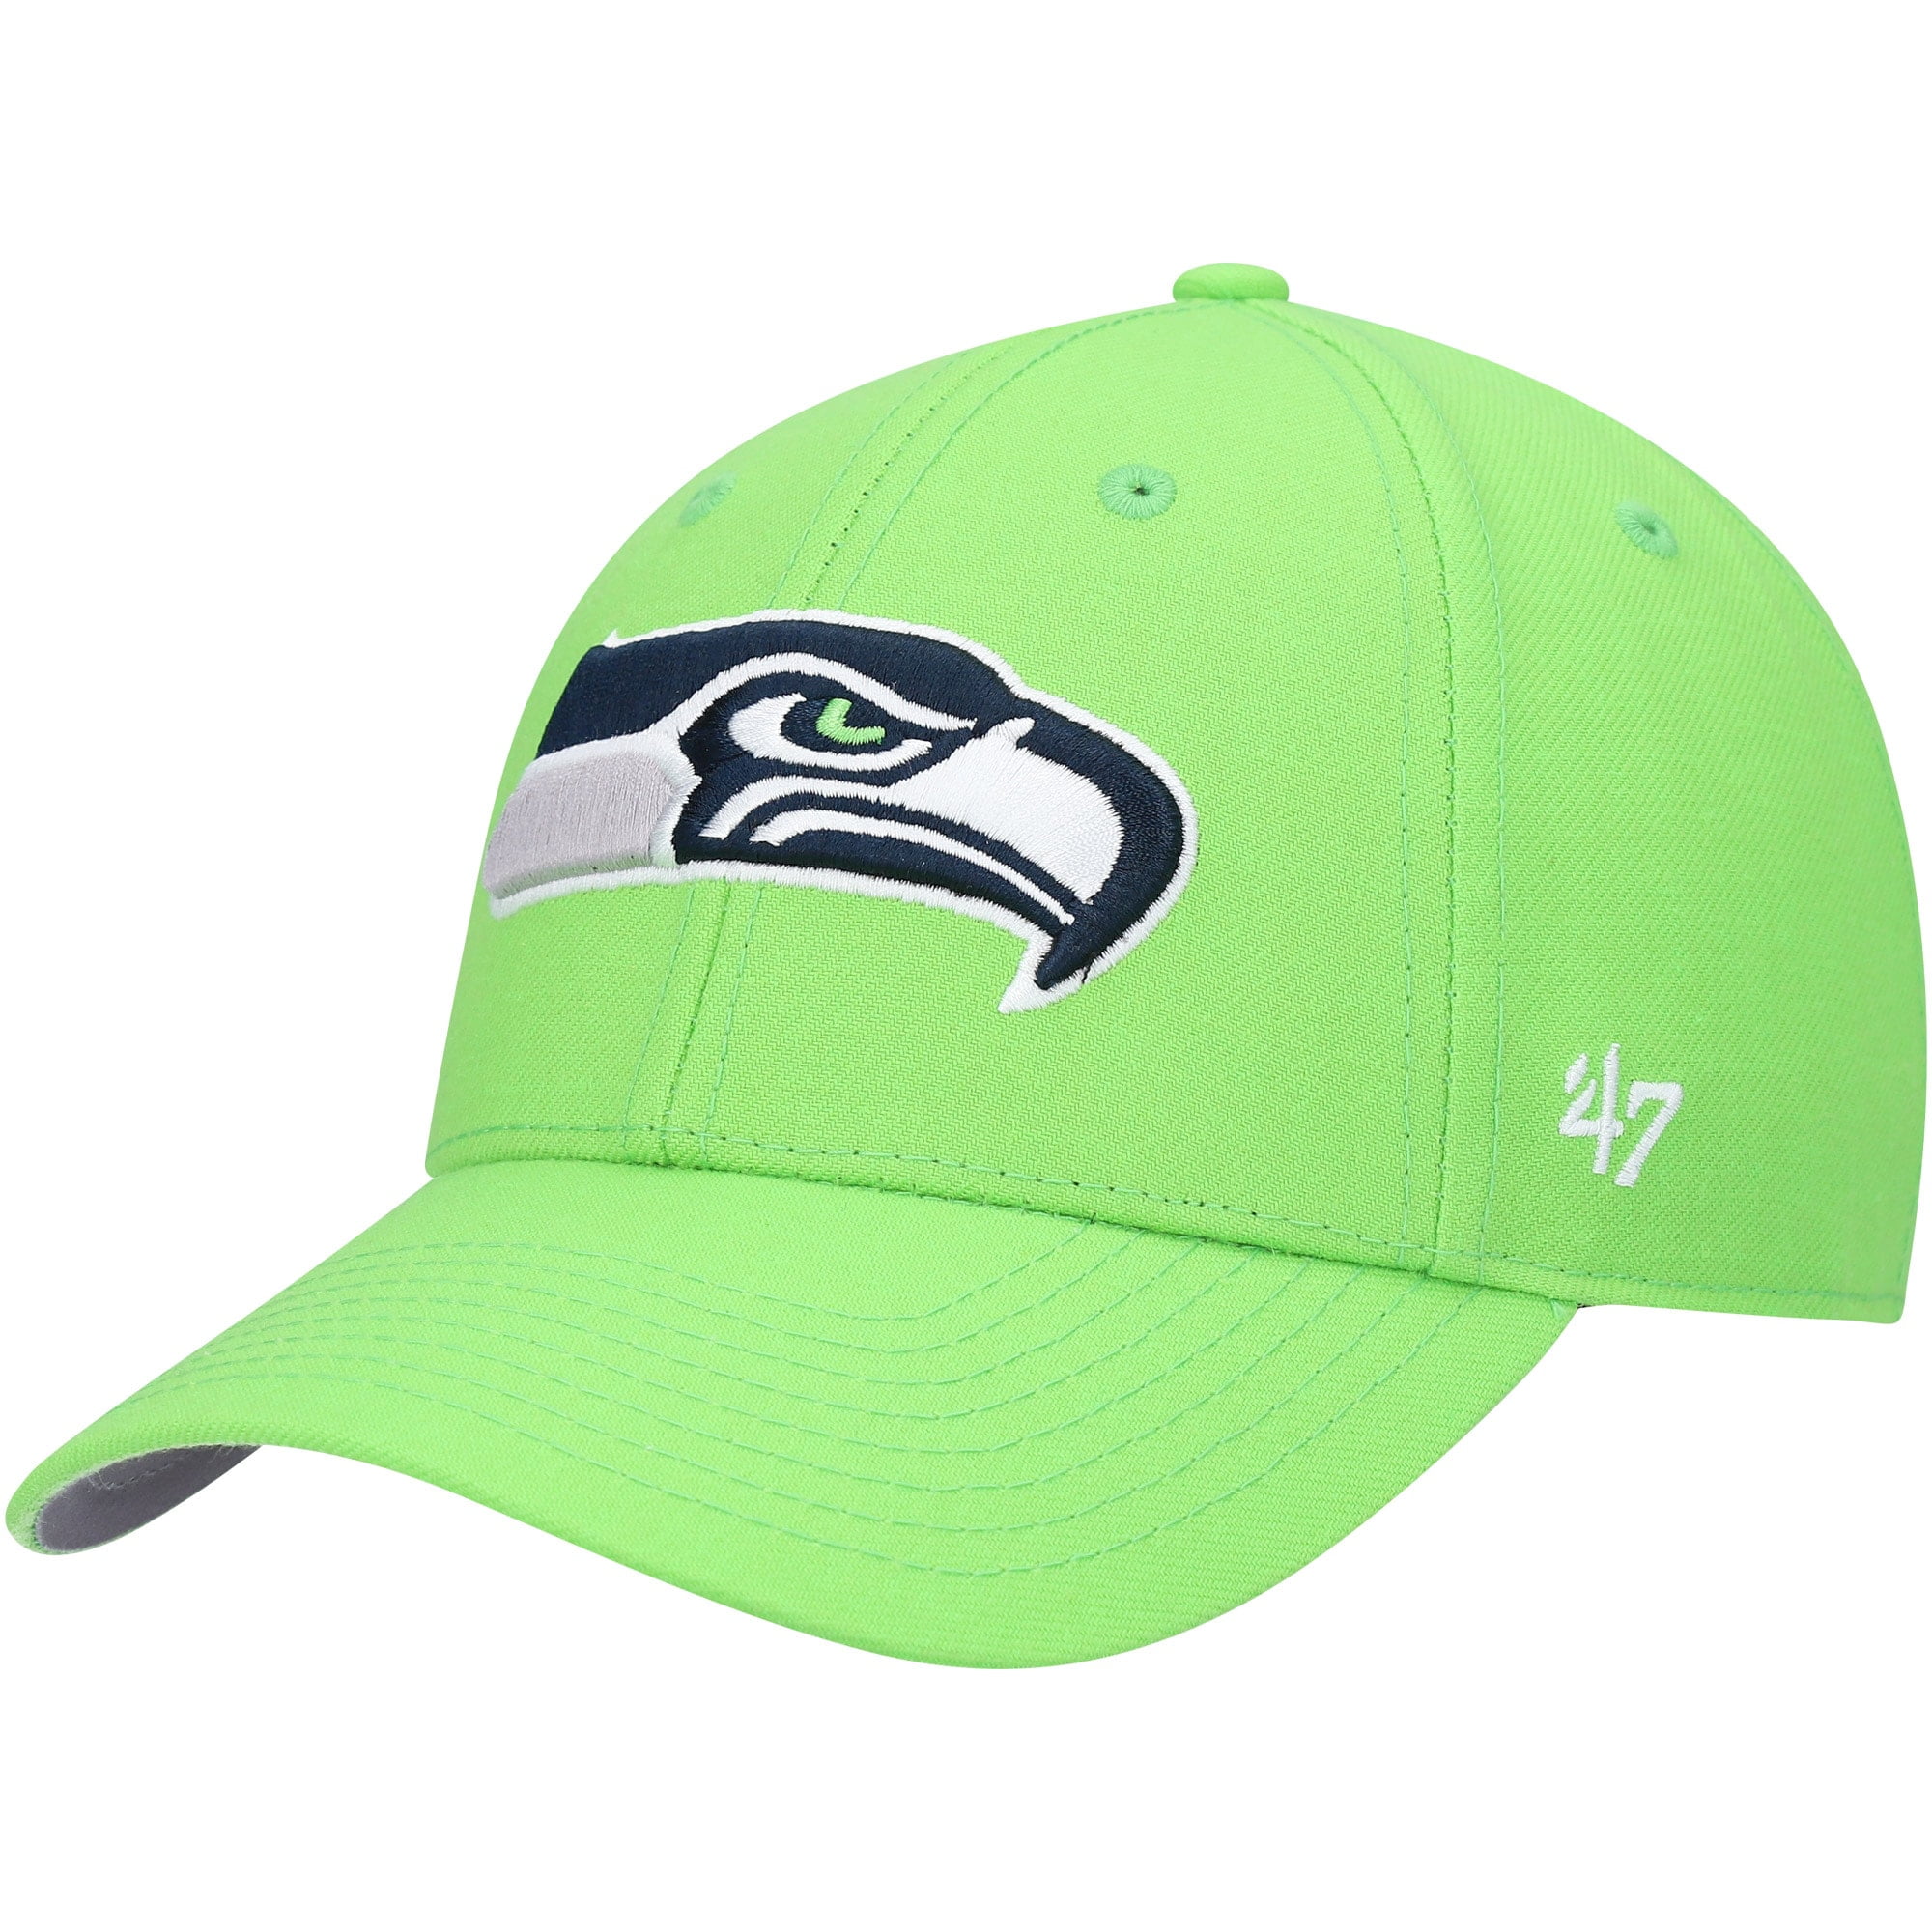 All neon everything. How do you feel about the Seahawks' 'Action